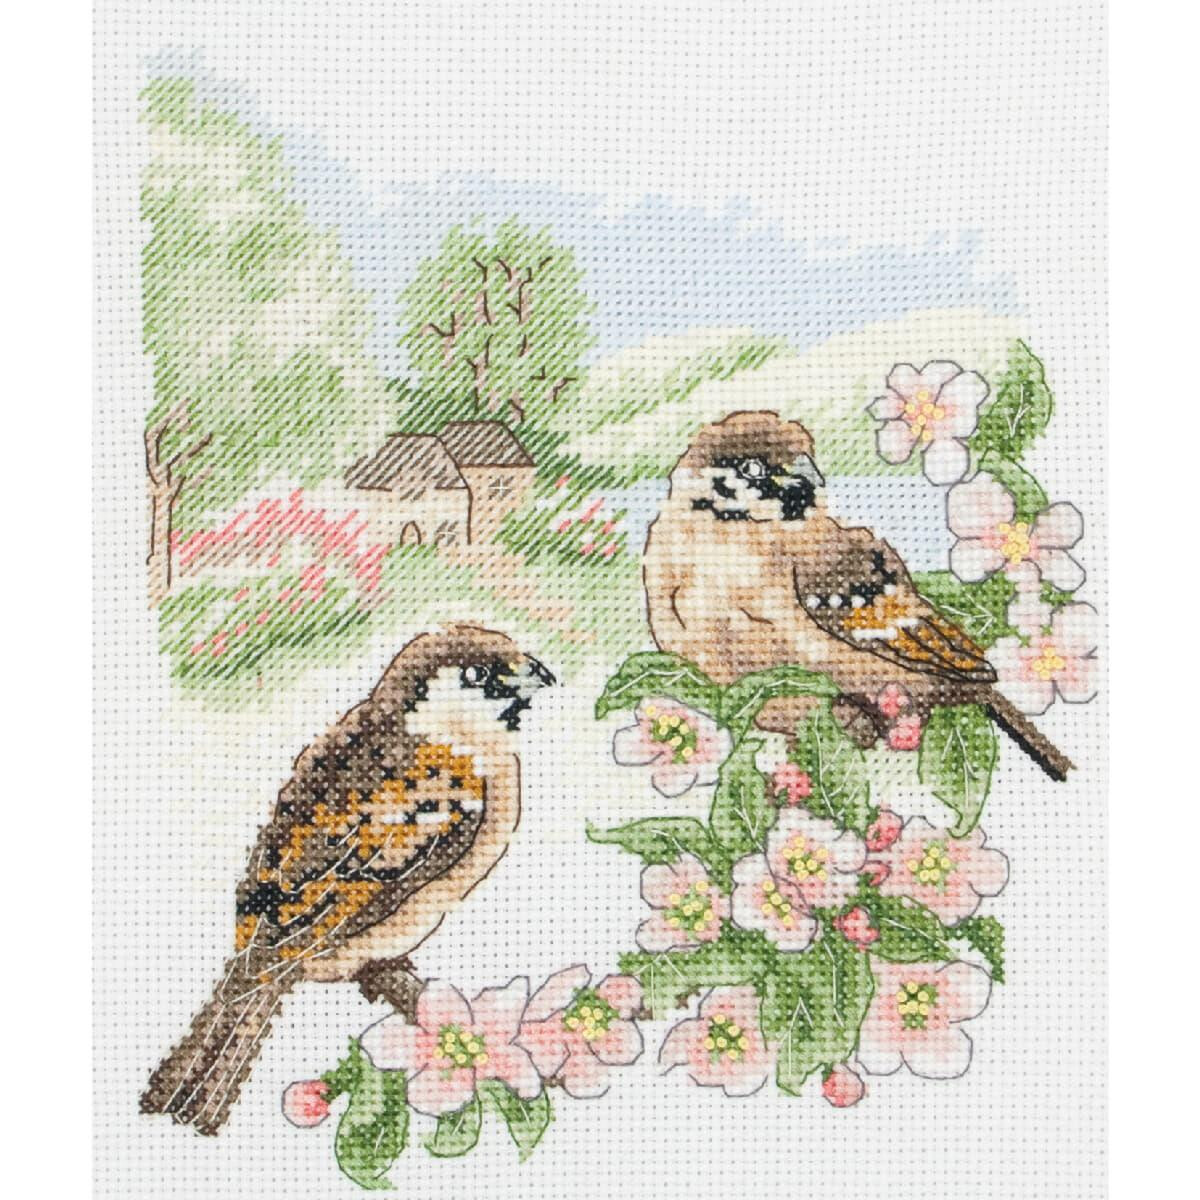 Anchor counted cross stitch kit "Spring...